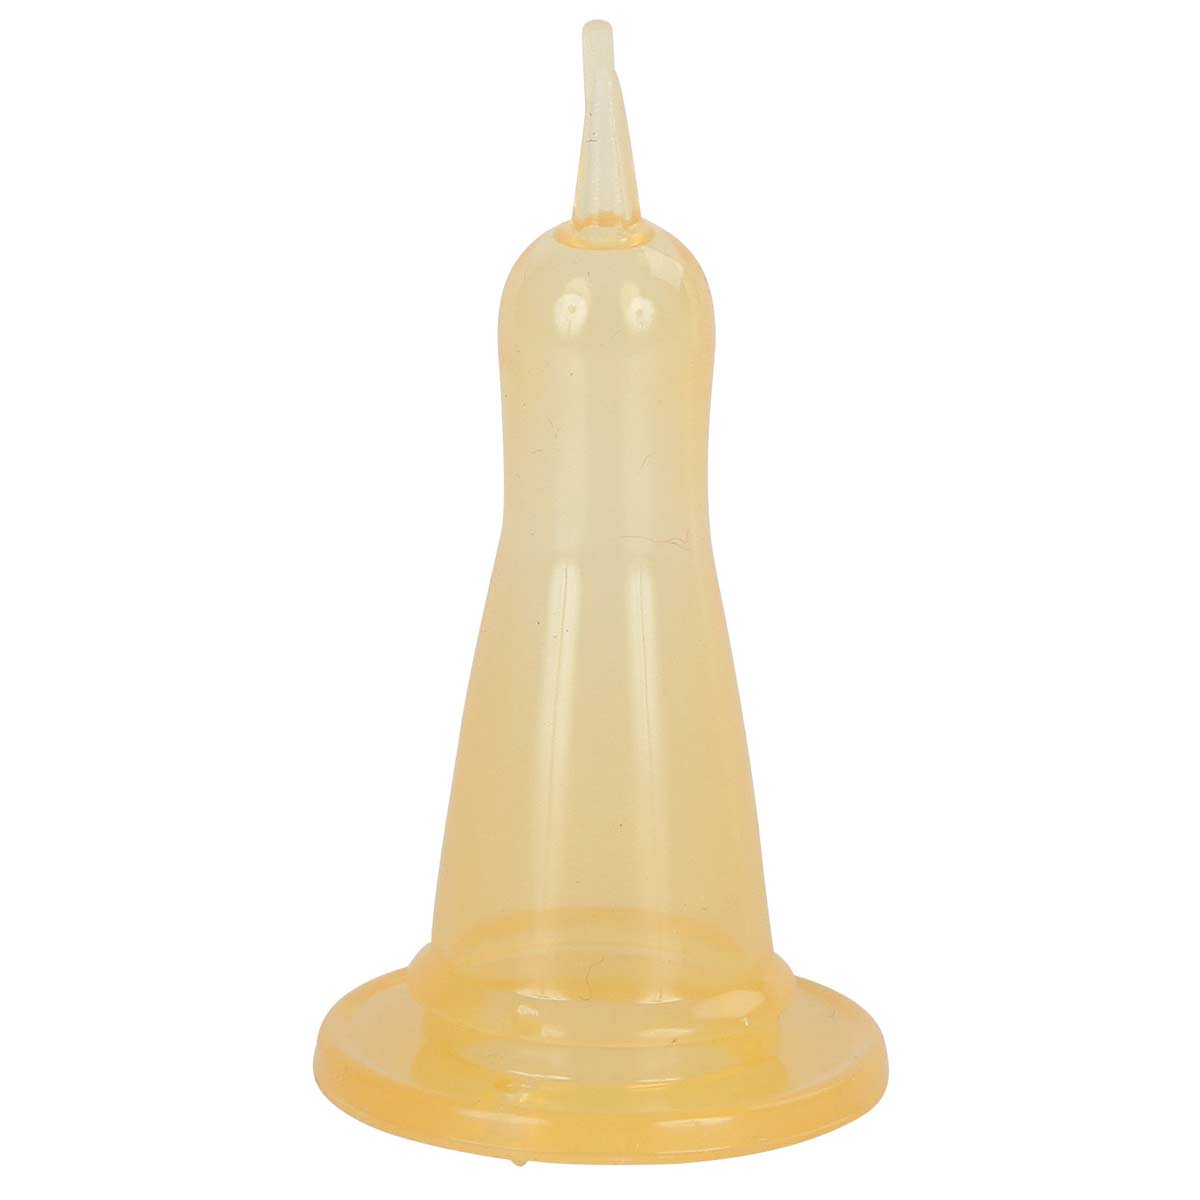 Spare teat for Anti-Vac lambfeed bottle